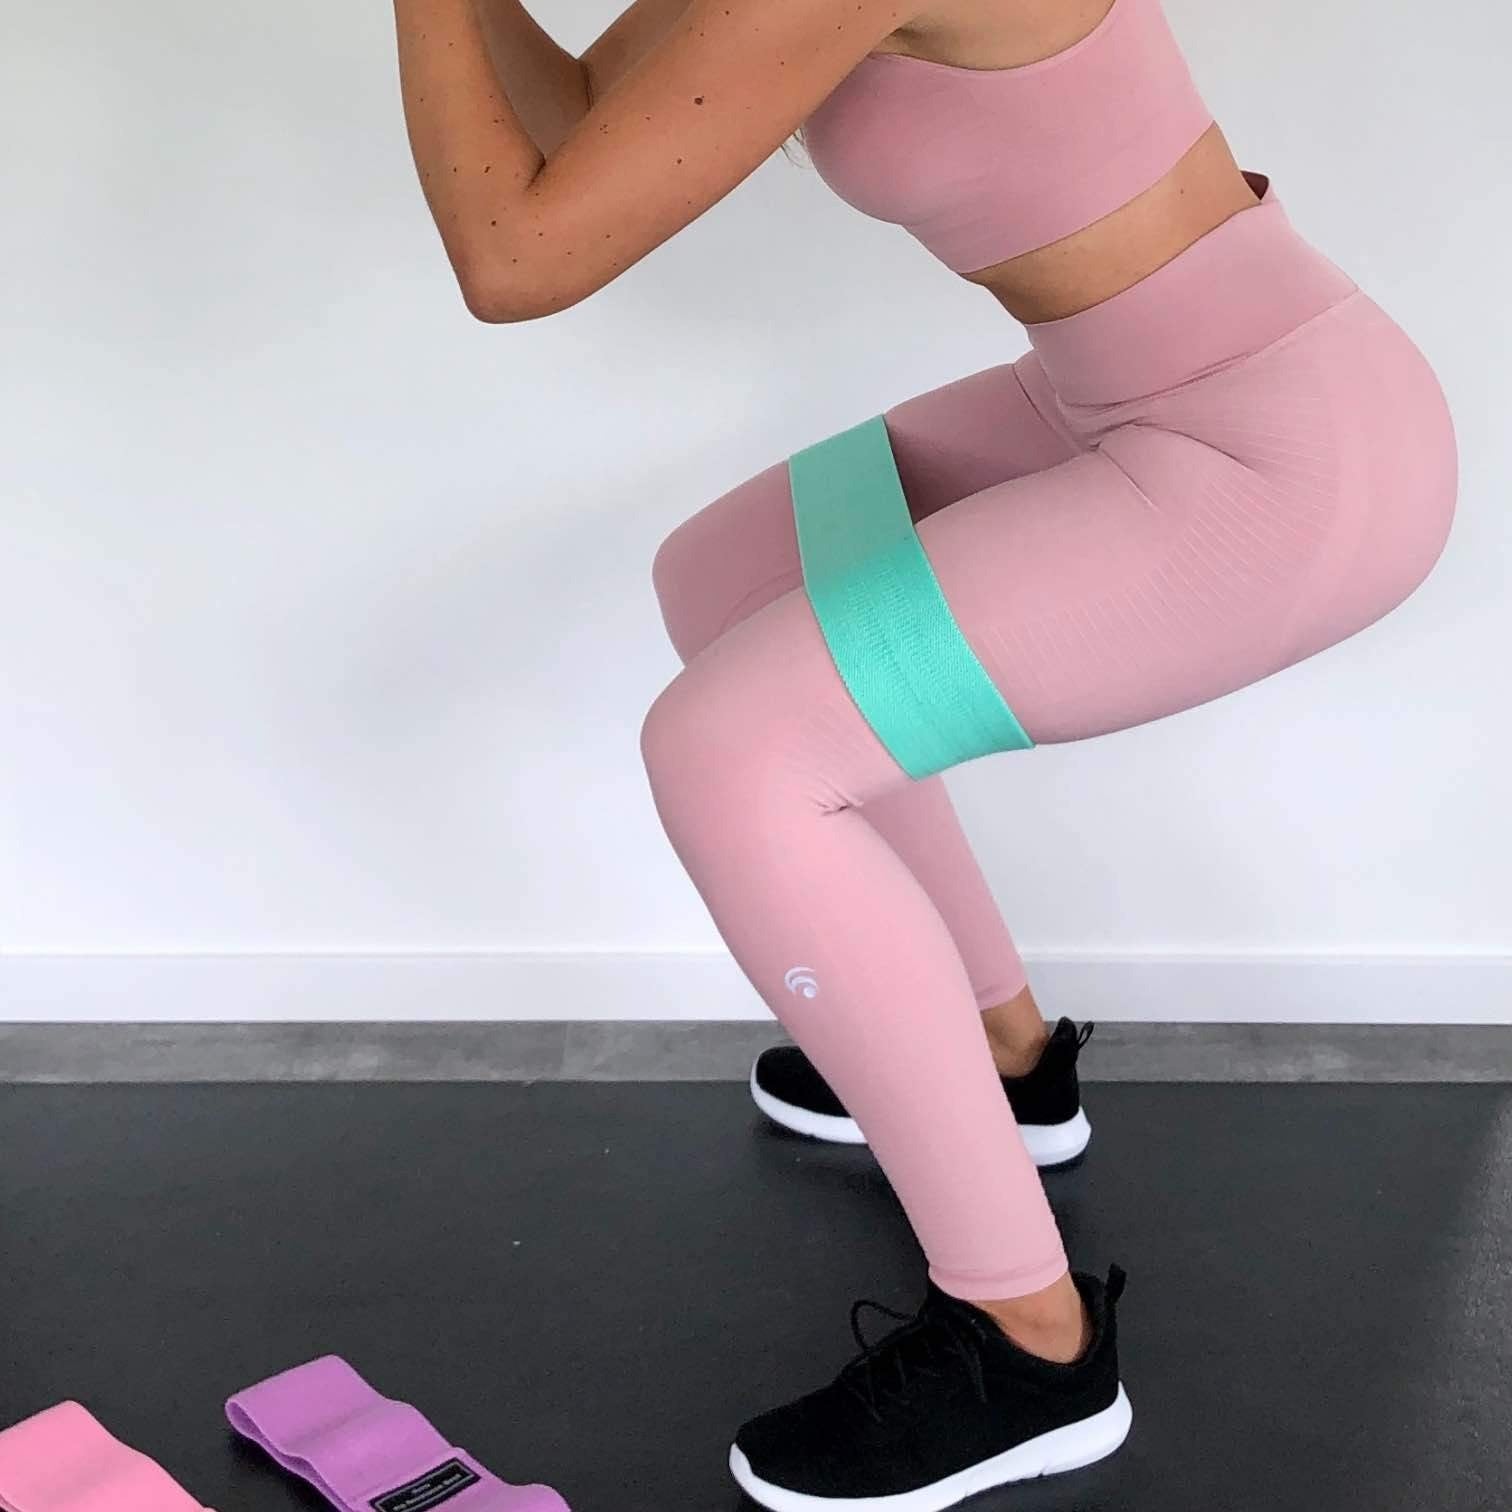 Blogger booty bands - accessories Model in all pink gym clothes with black & white sneakers doing a squat using the green Blogger Booty Band around her thighs just above the knees